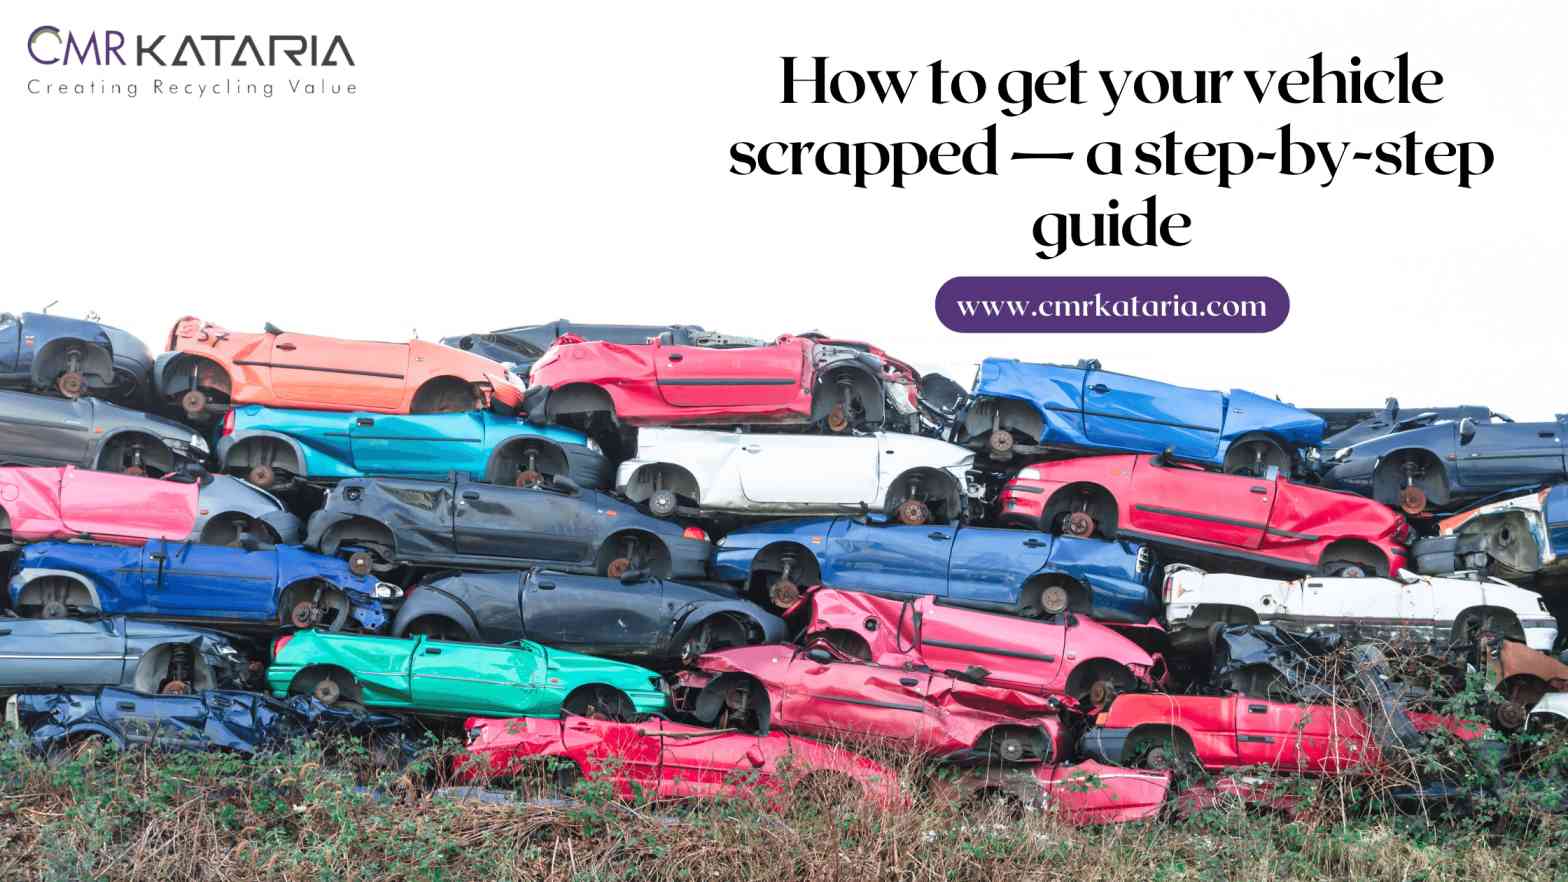 How to get your vehicle scrapped — a step-by-step guide